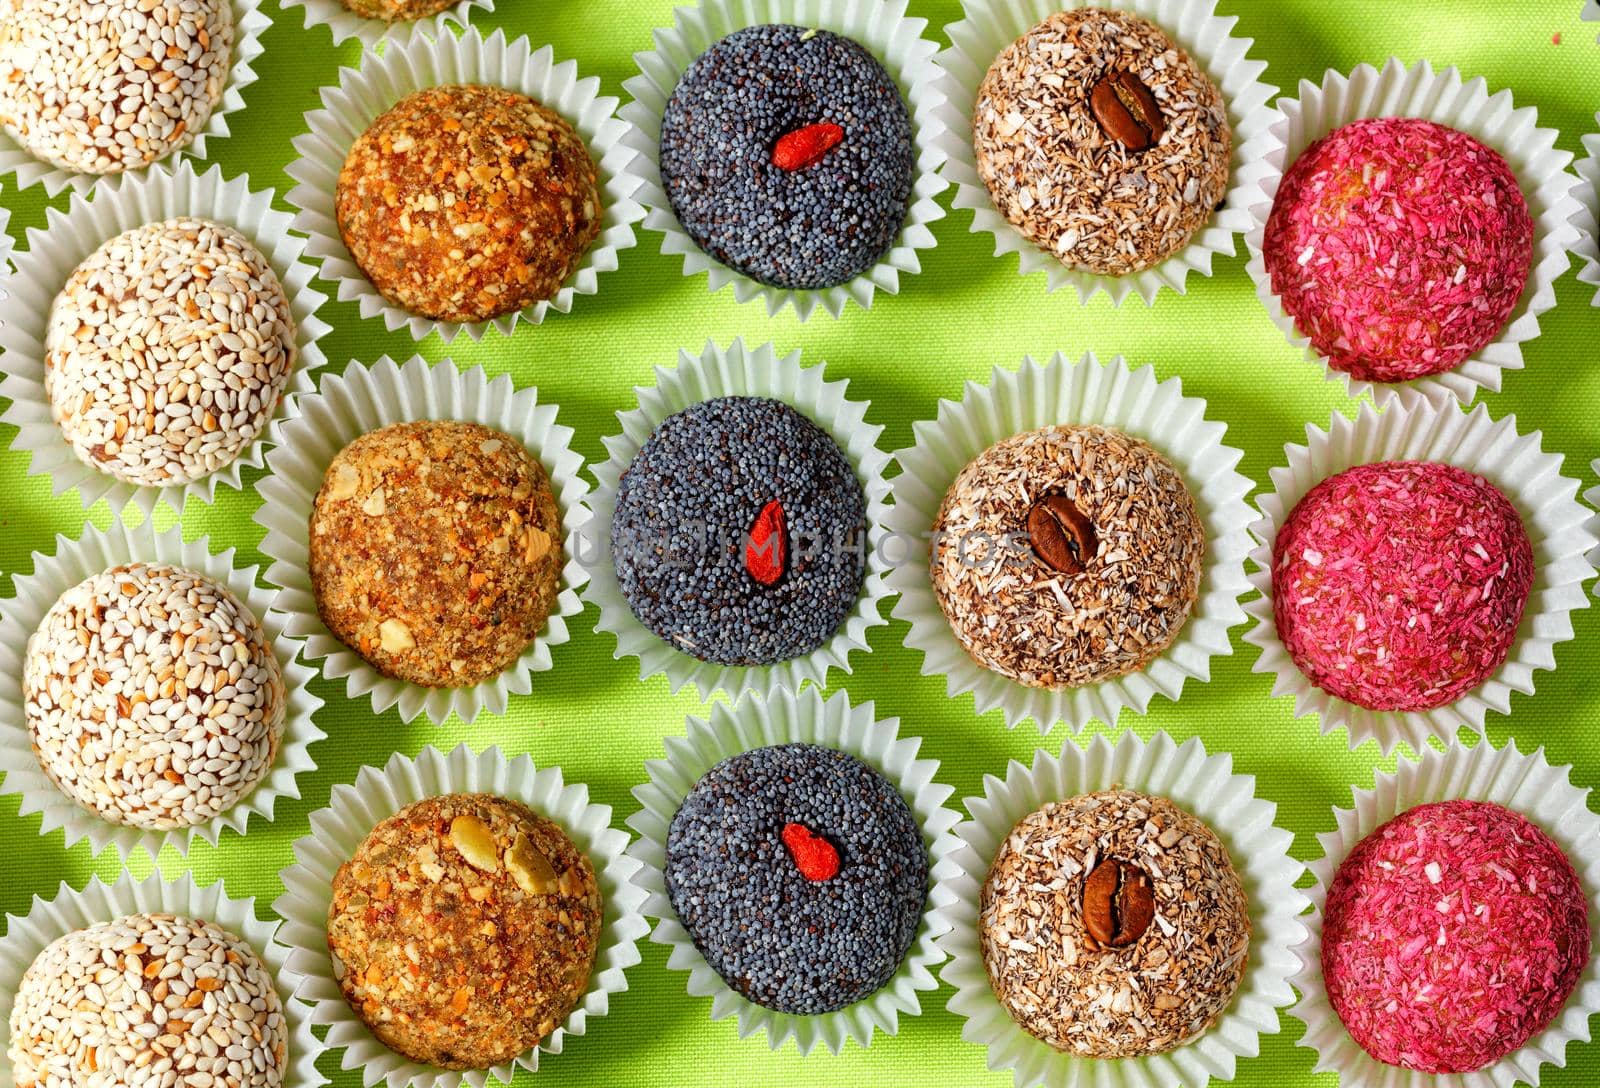 Collection of handmade energy balls with various seed fillings in paper baskets, healthy dessert and appetizer on a bright light green background.